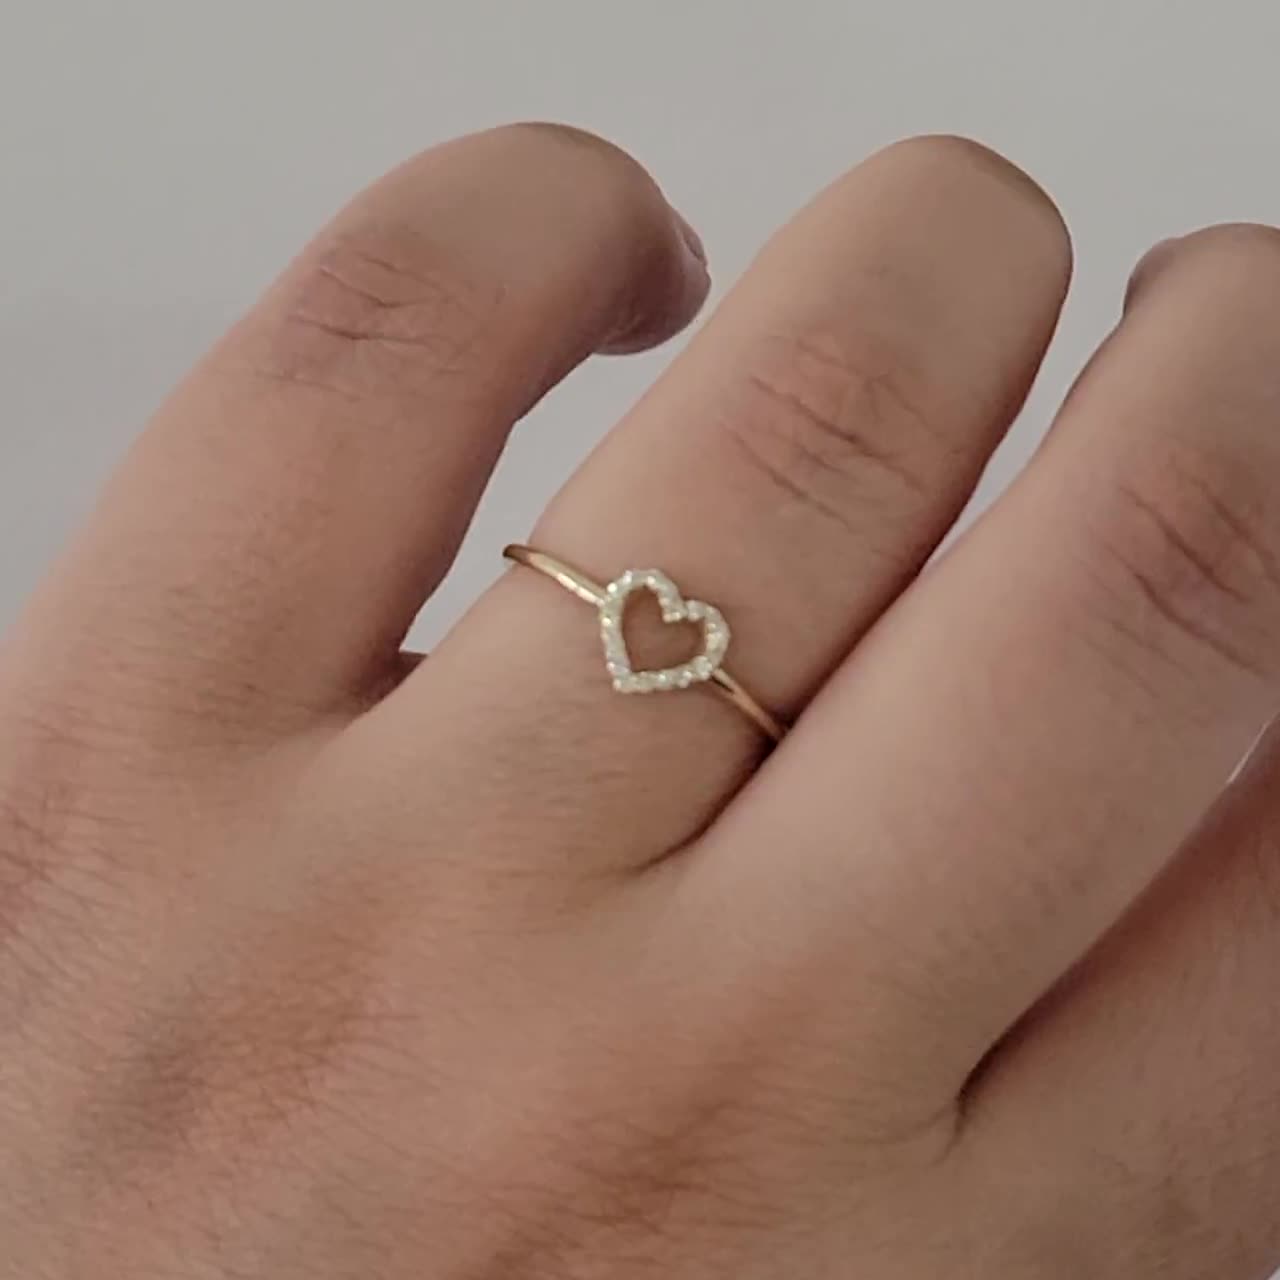 Large Open Heart Ring Women Solid 14K Real Gold Minimalist